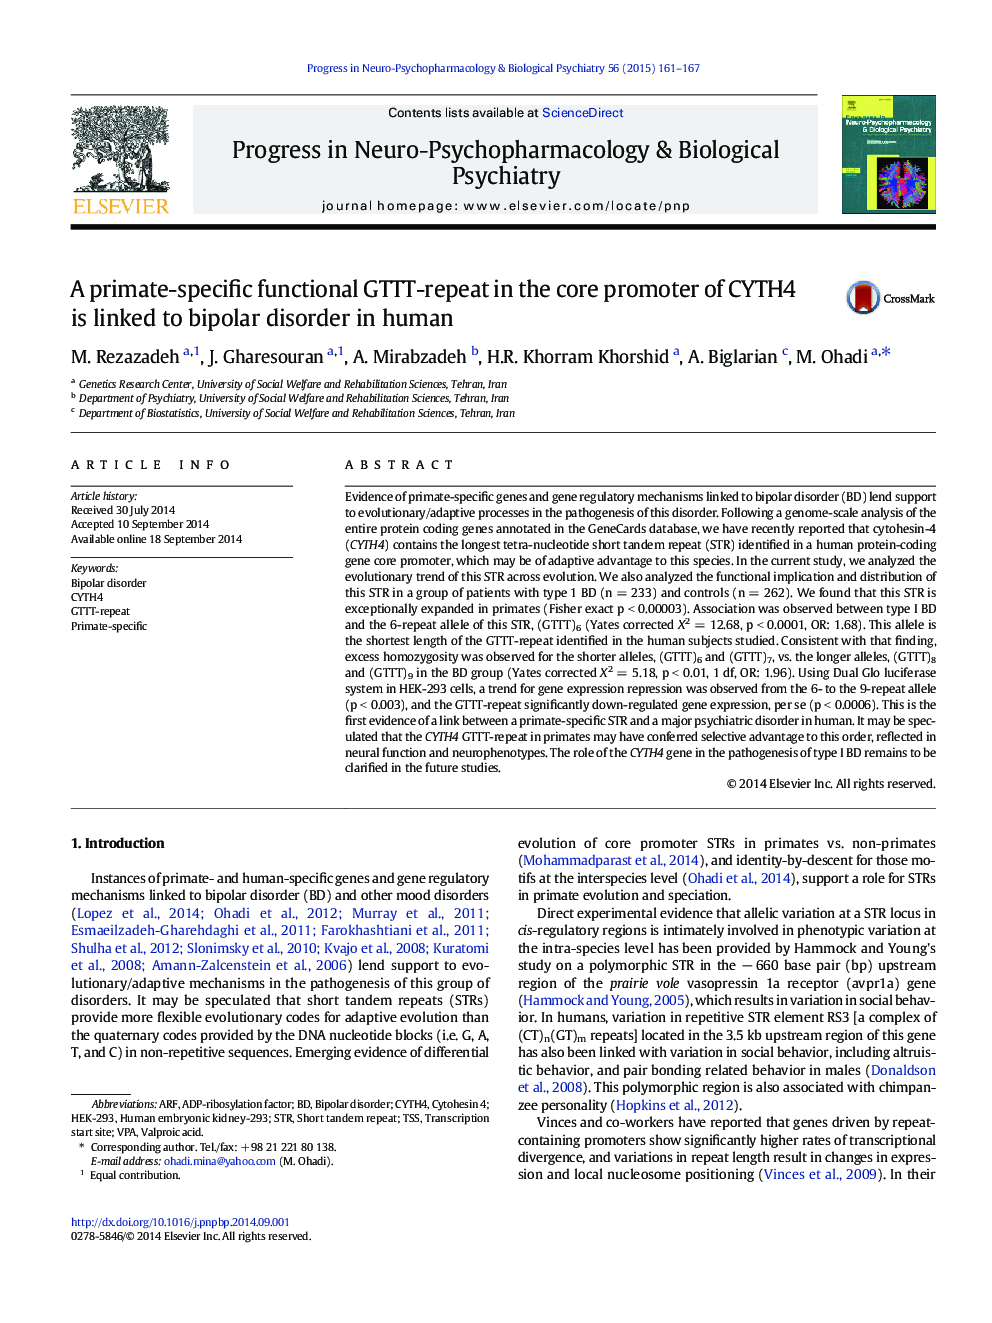 A primate-specific functional GTTT-repeat in the core promoter of CYTH4 is linked to bipolar disorder in human